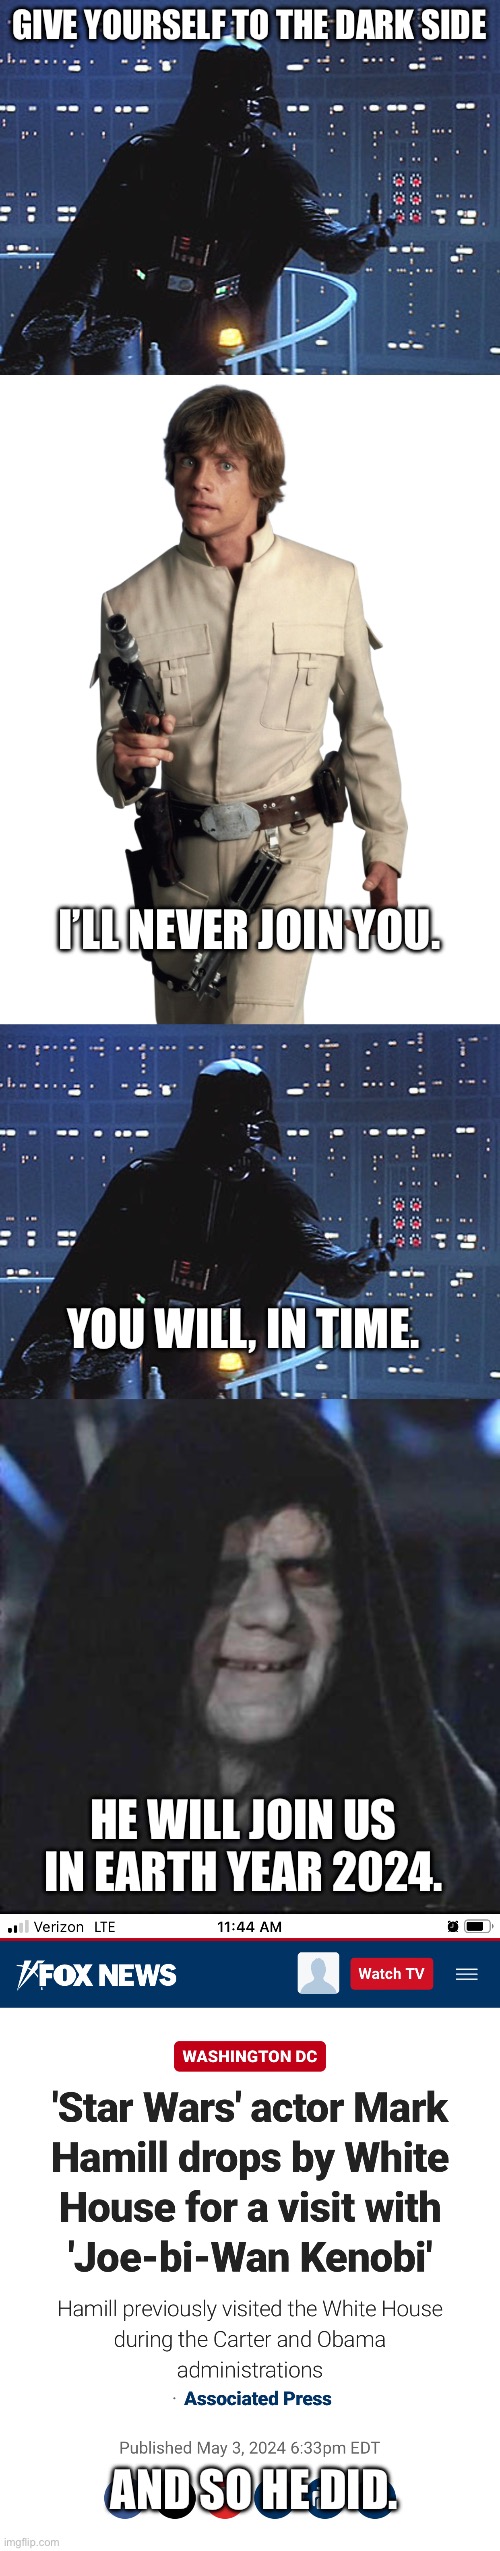 GIVE YOURSELF TO THE DARK SIDE; I’LL NEVER JOIN YOU. YOU WILL, IN TIME. HE WILL JOIN US IN EARTH YEAR 2024. AND SO HE DID. | image tagged in darth vader - come to the dark side,luke skywalker transparent background,memes,sidious error | made w/ Imgflip meme maker